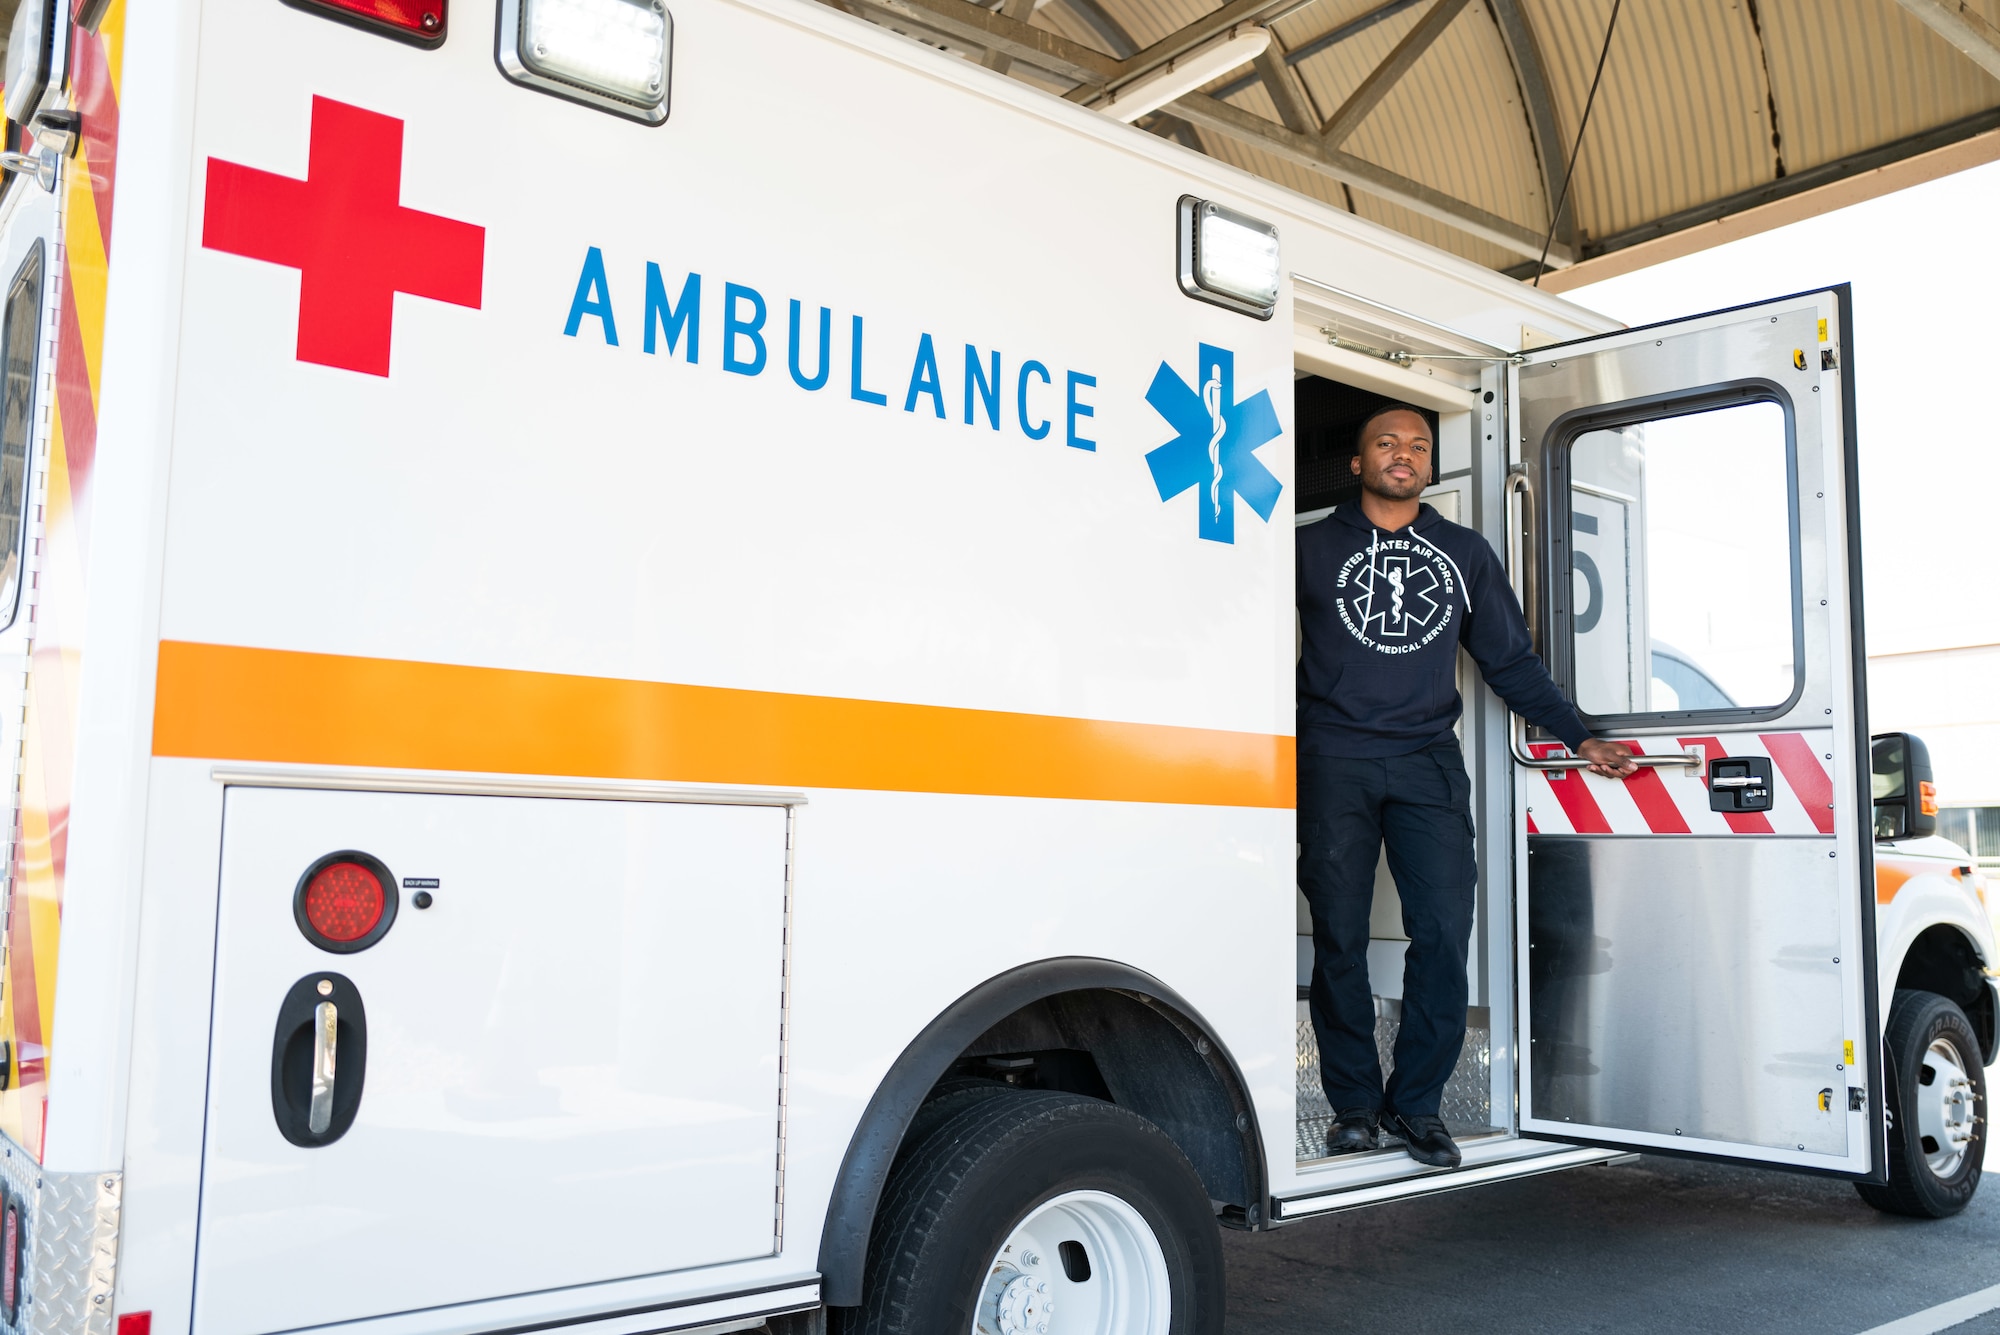 Airman standing in an ambulance